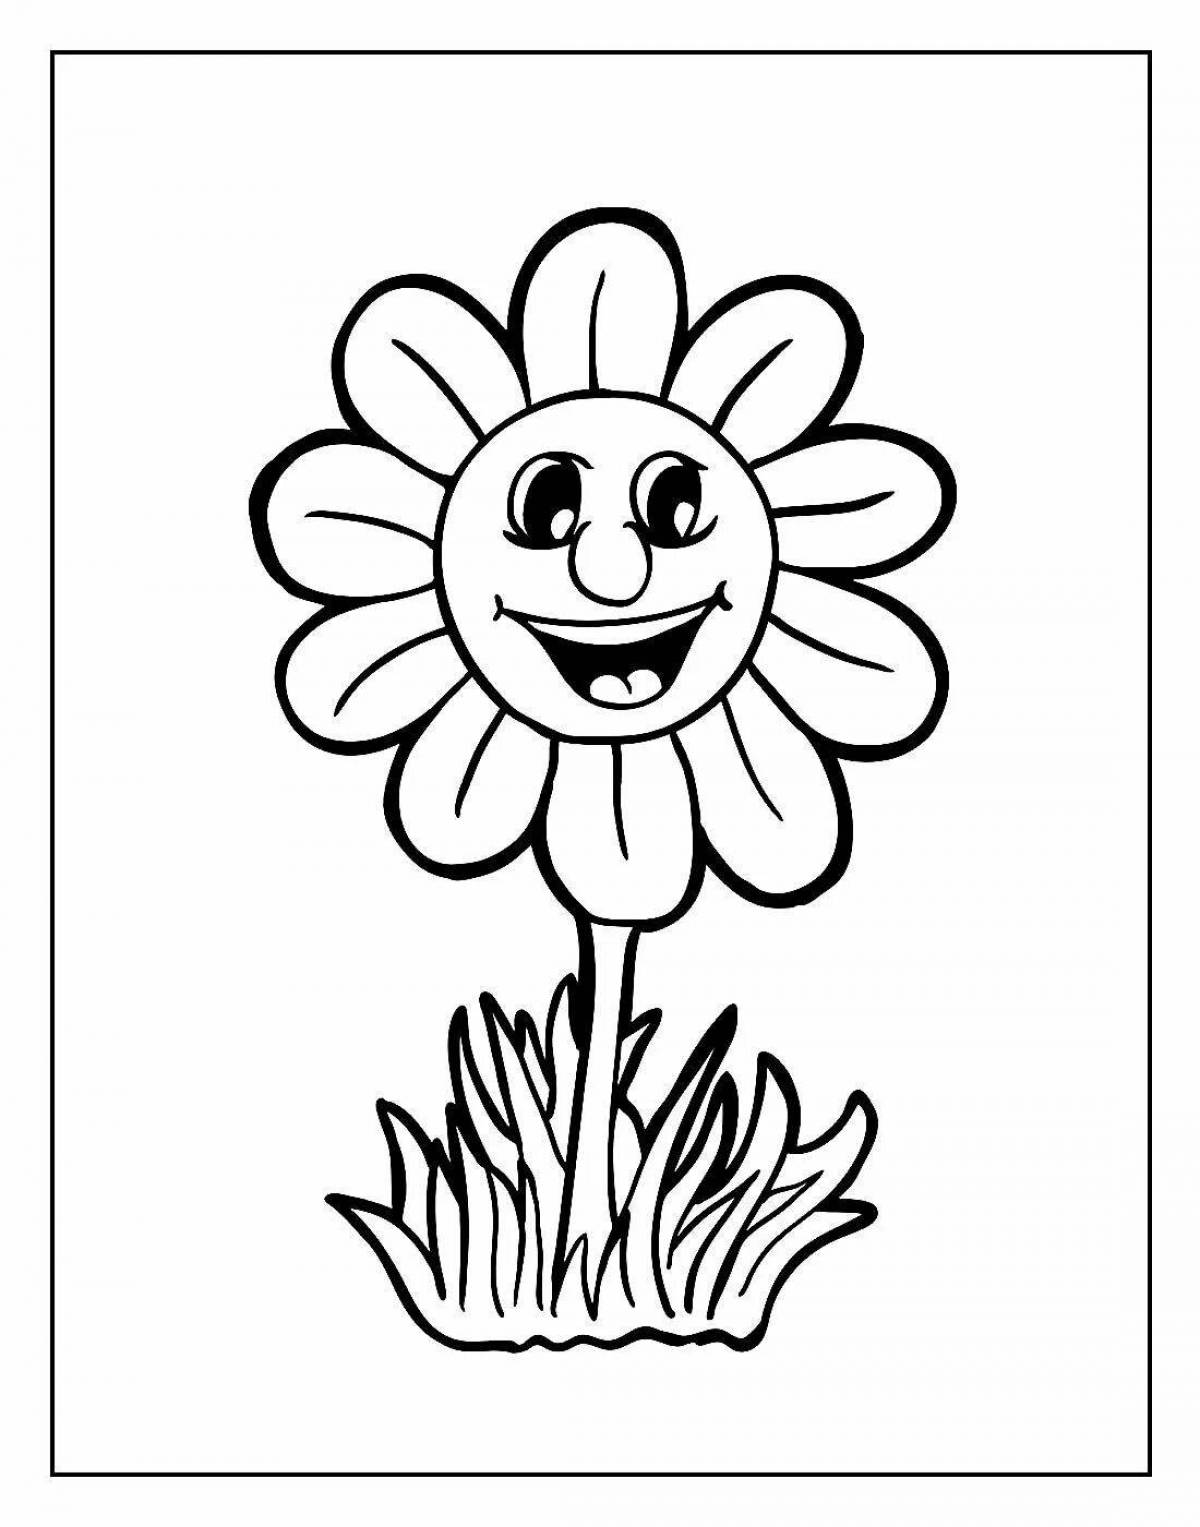 Smiling flower coloring book